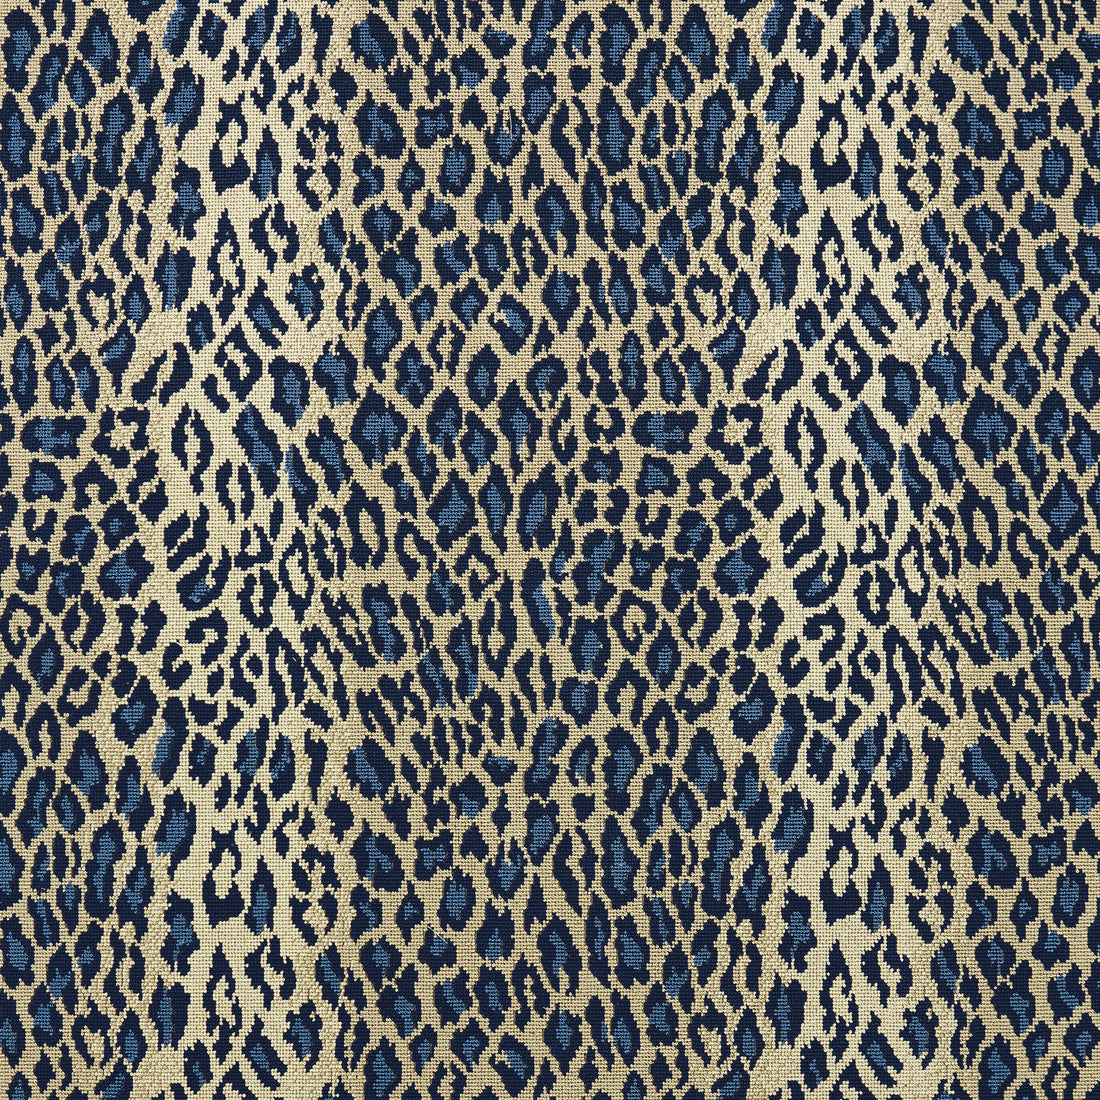 Amur fabric in navy color - pattern number W80437 - by Thibaut in the Woven Resource Vol 10 Menagerie collection